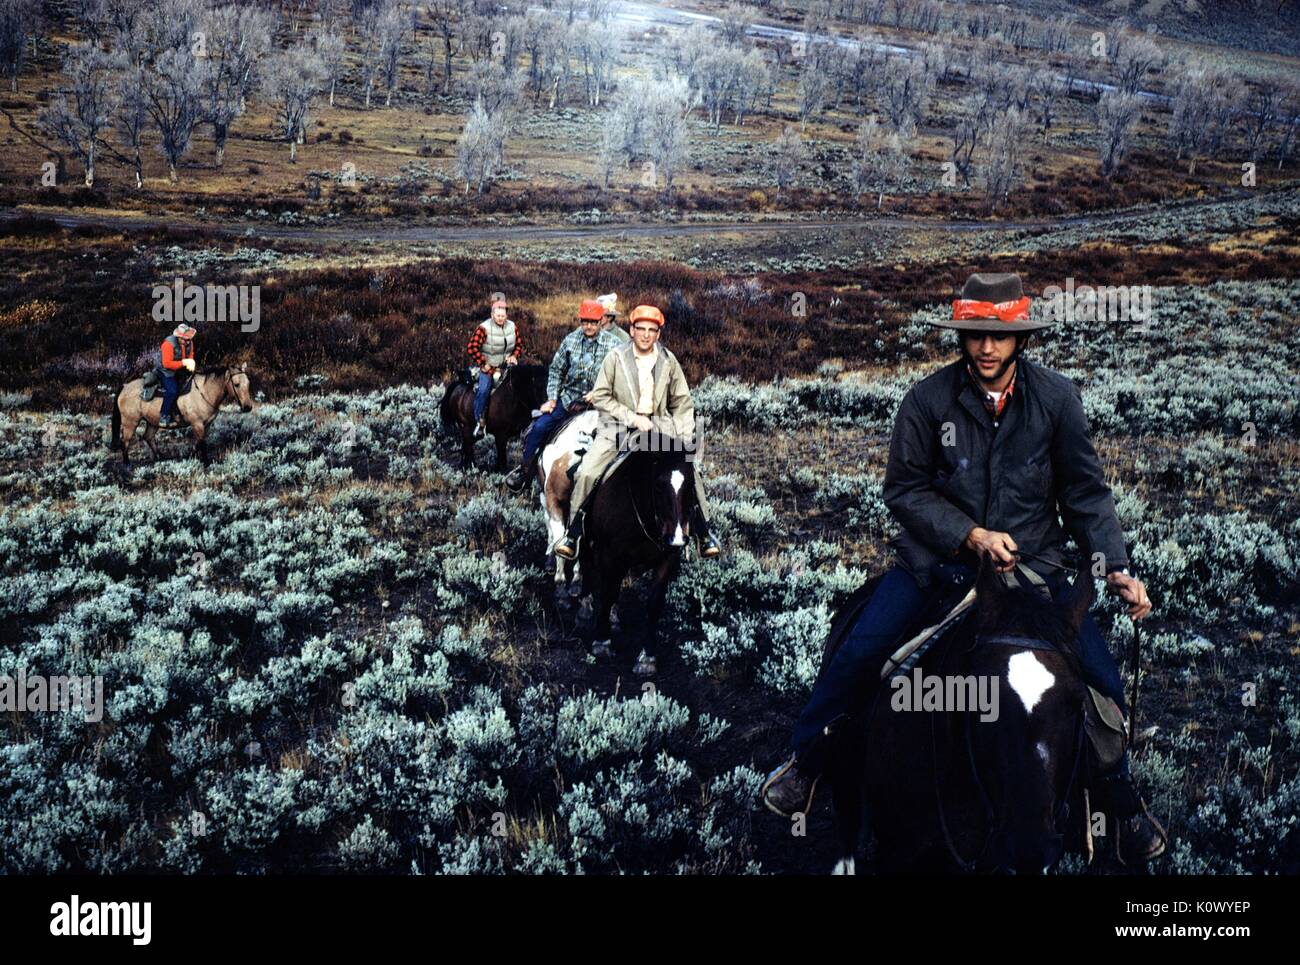 Group of hunters on horseback, riding through scrubgrass in a line during a hunting trip, wearing cowboy hat and smiling, 1971. Stock Photo